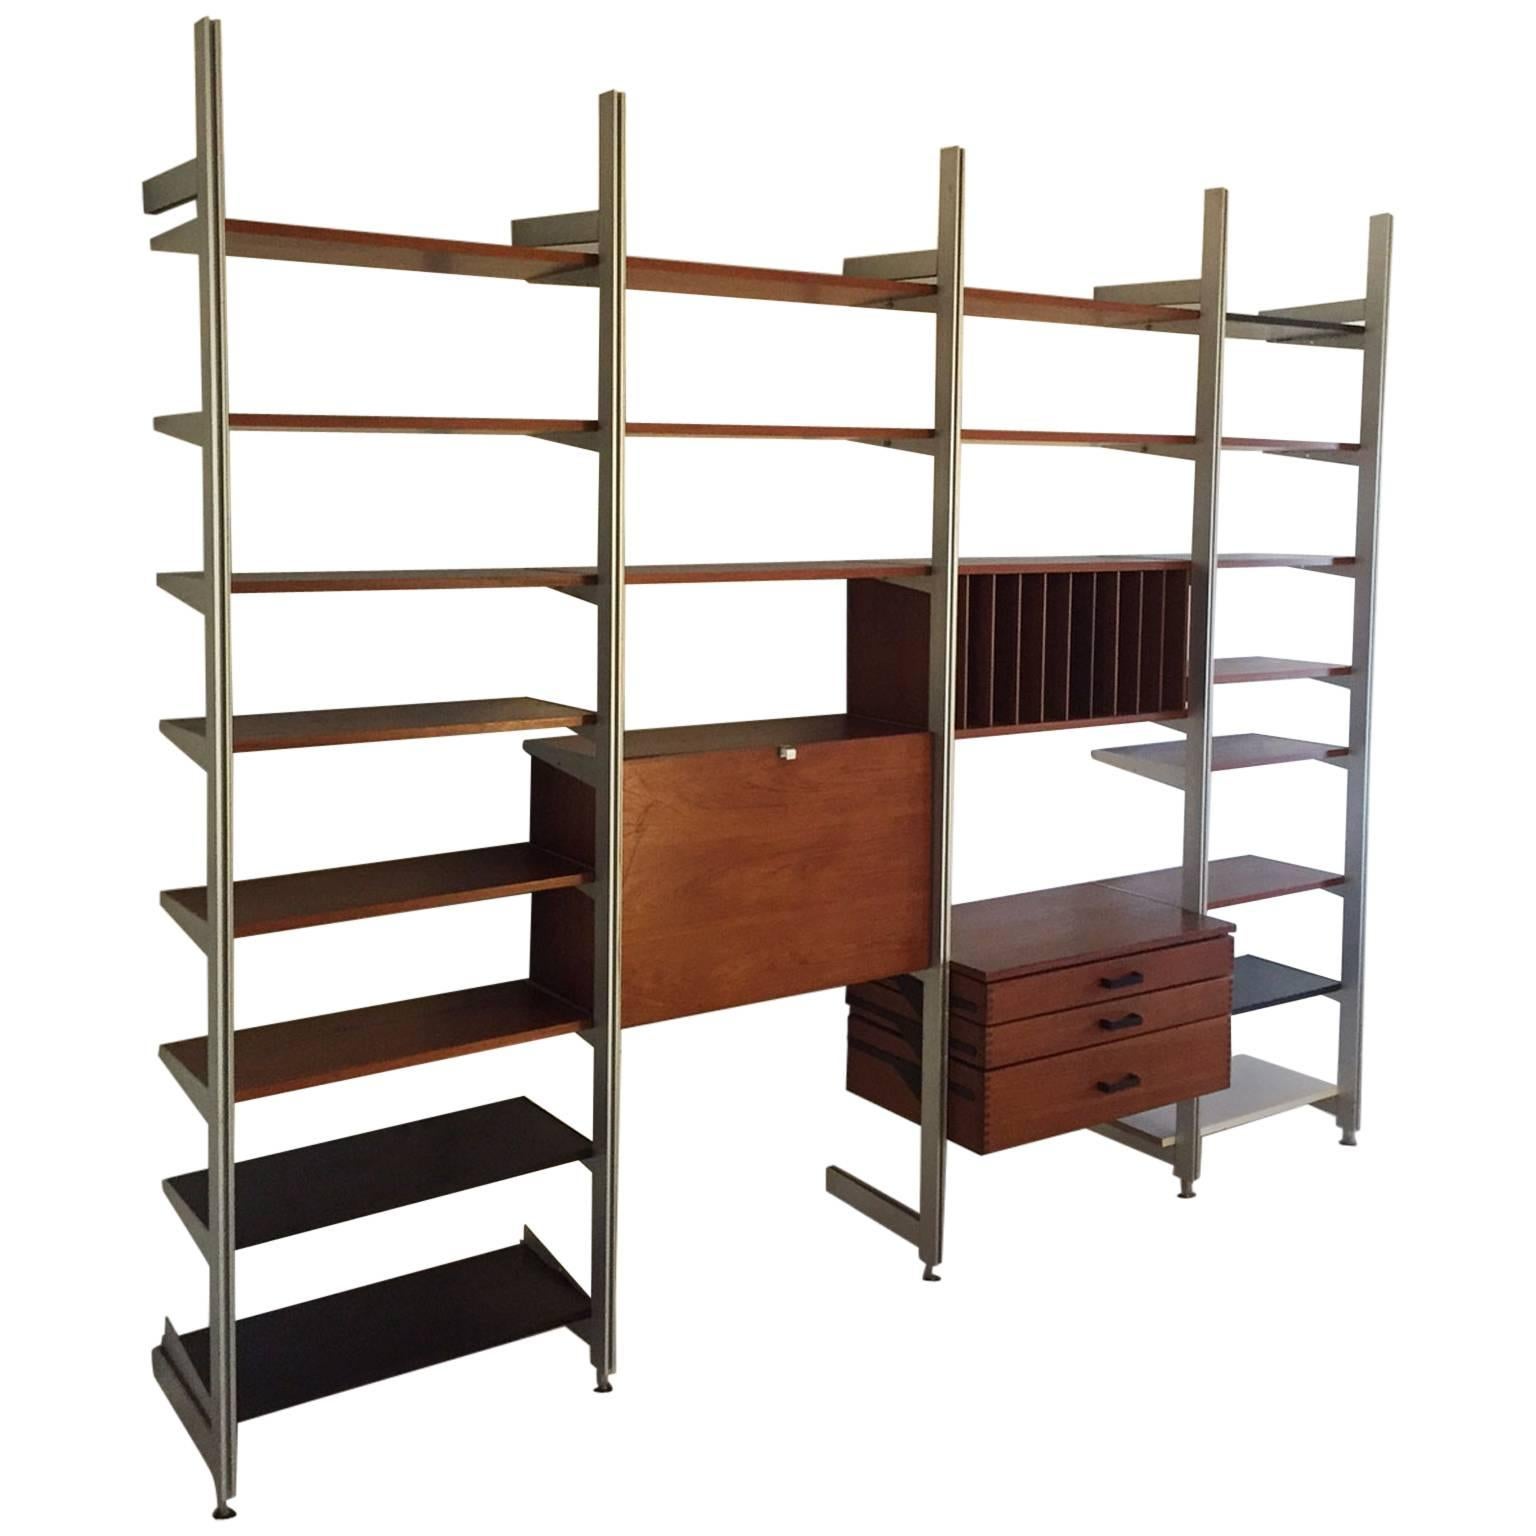 George Nelson CSS Wall Unit